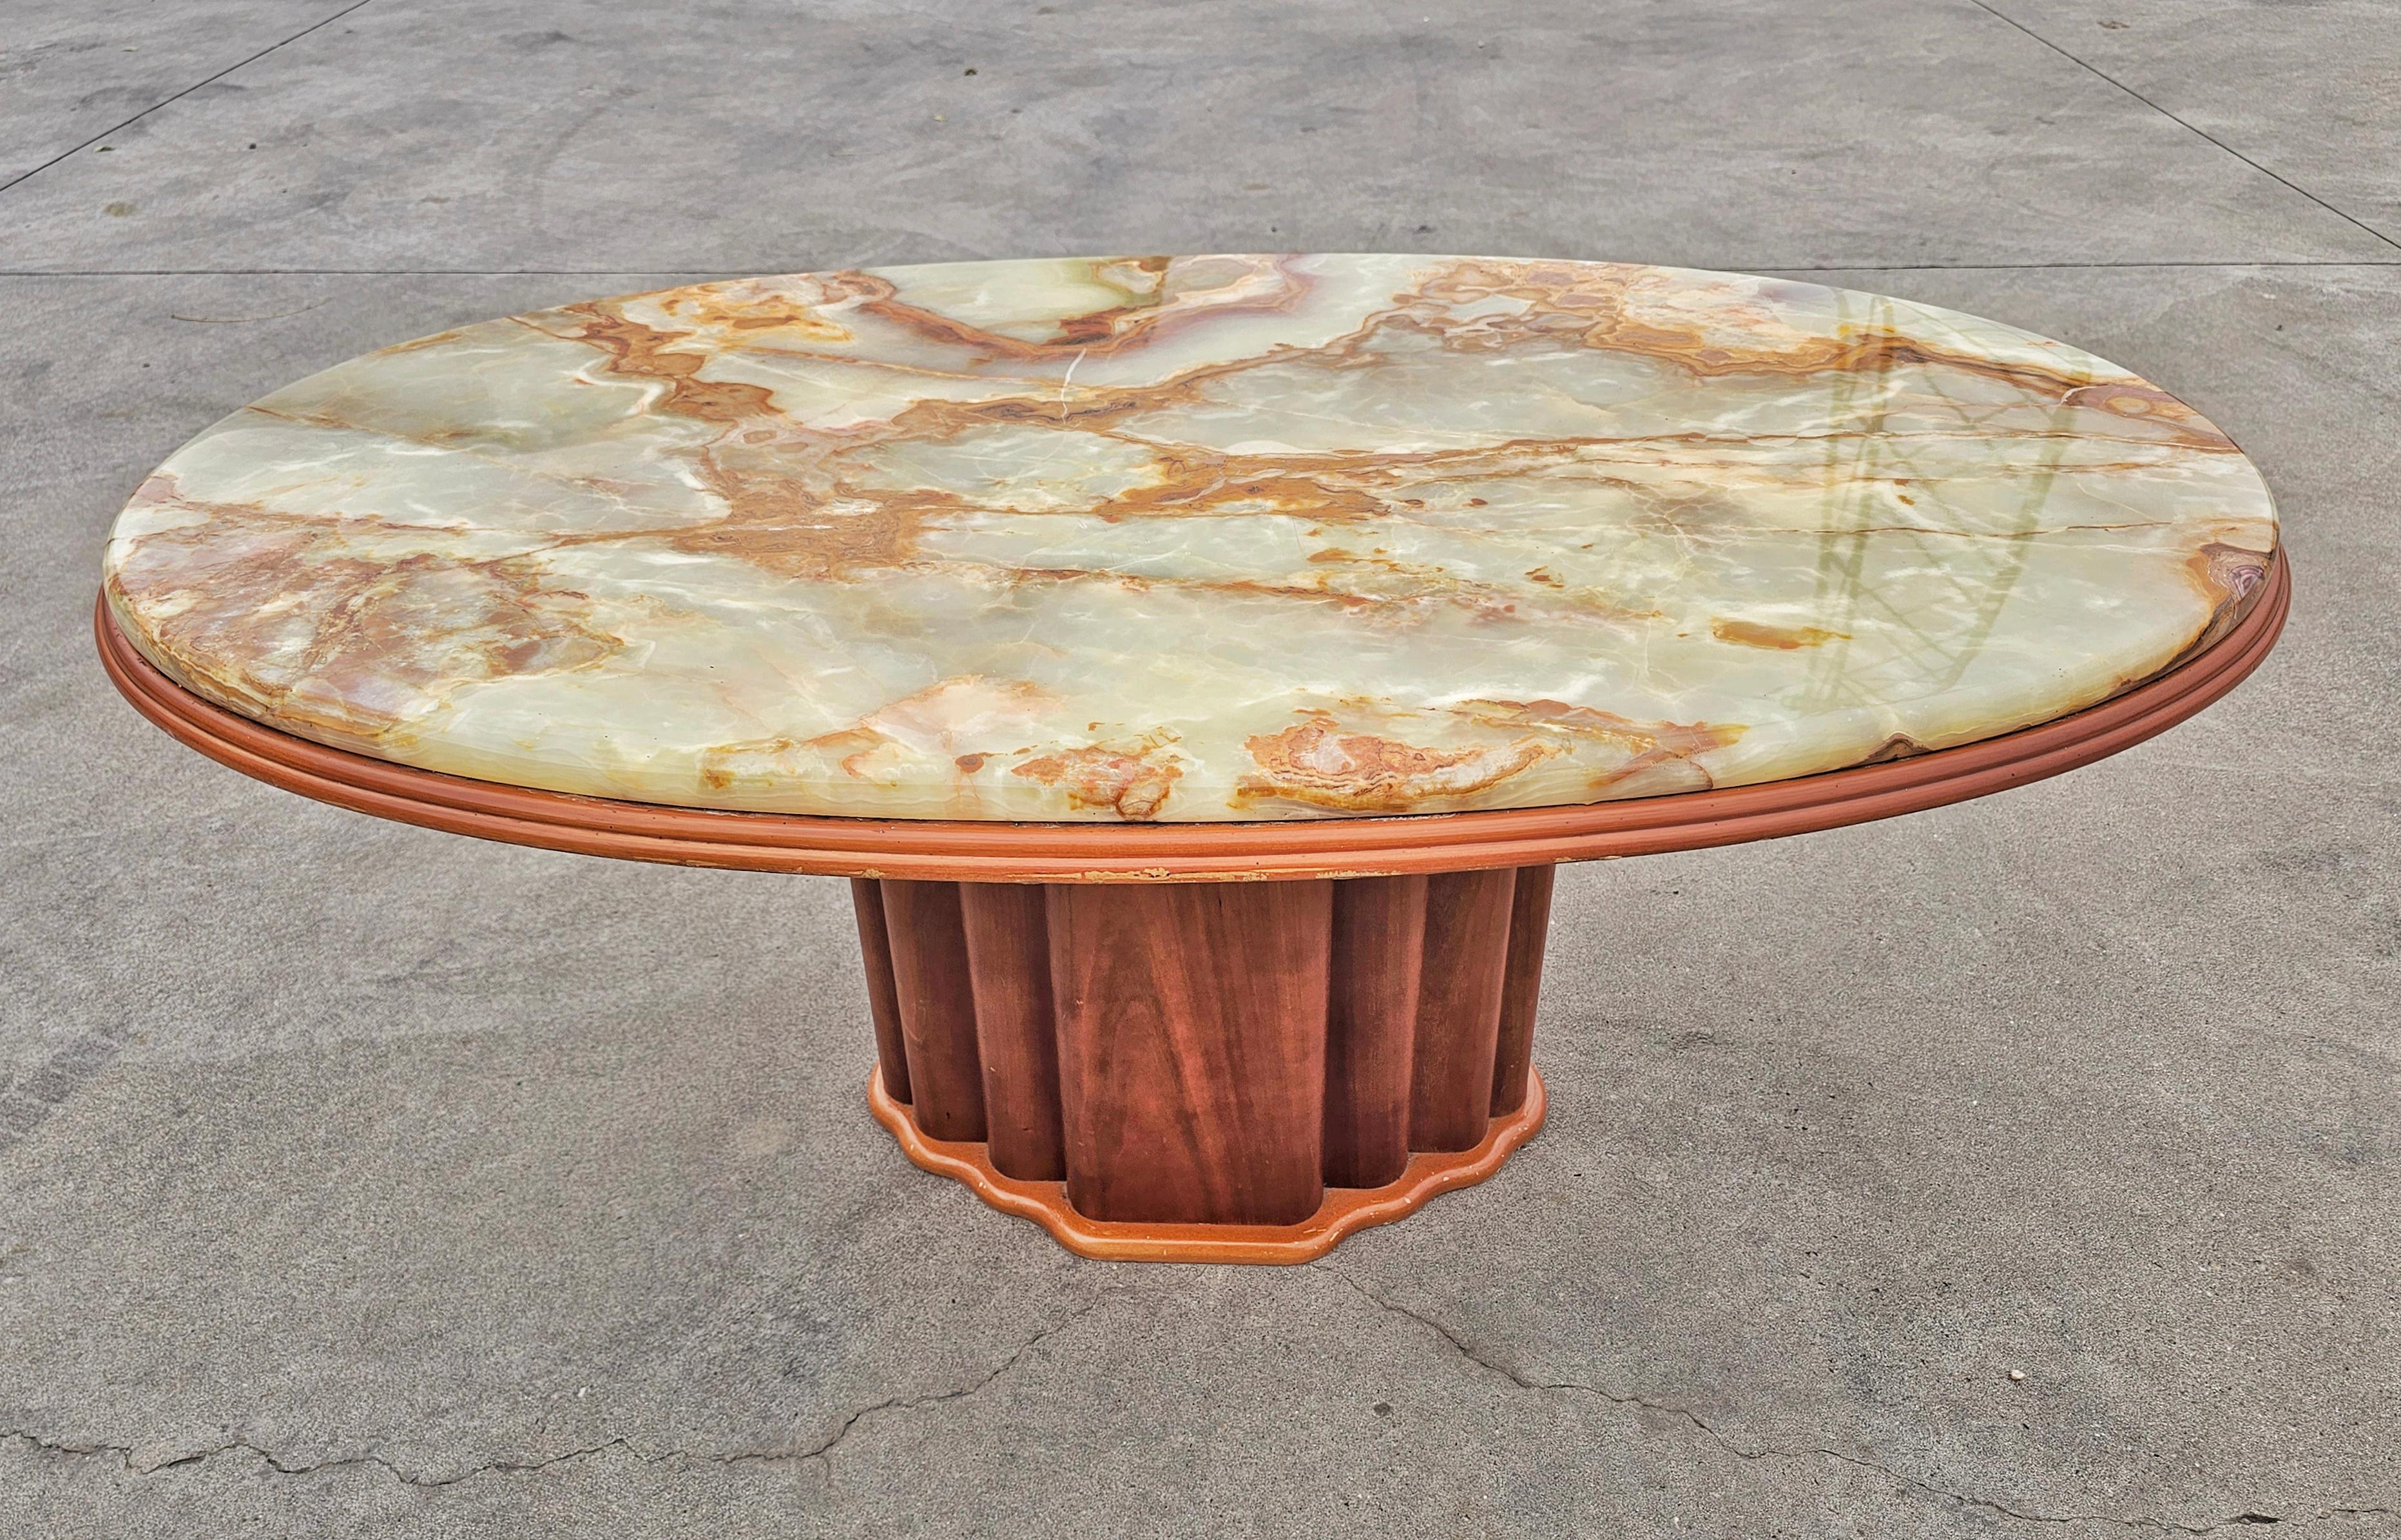 Art Deco Inspired Coffee Table with Onyx Top by Hohnert Design, Germany 1970s For Sale 6